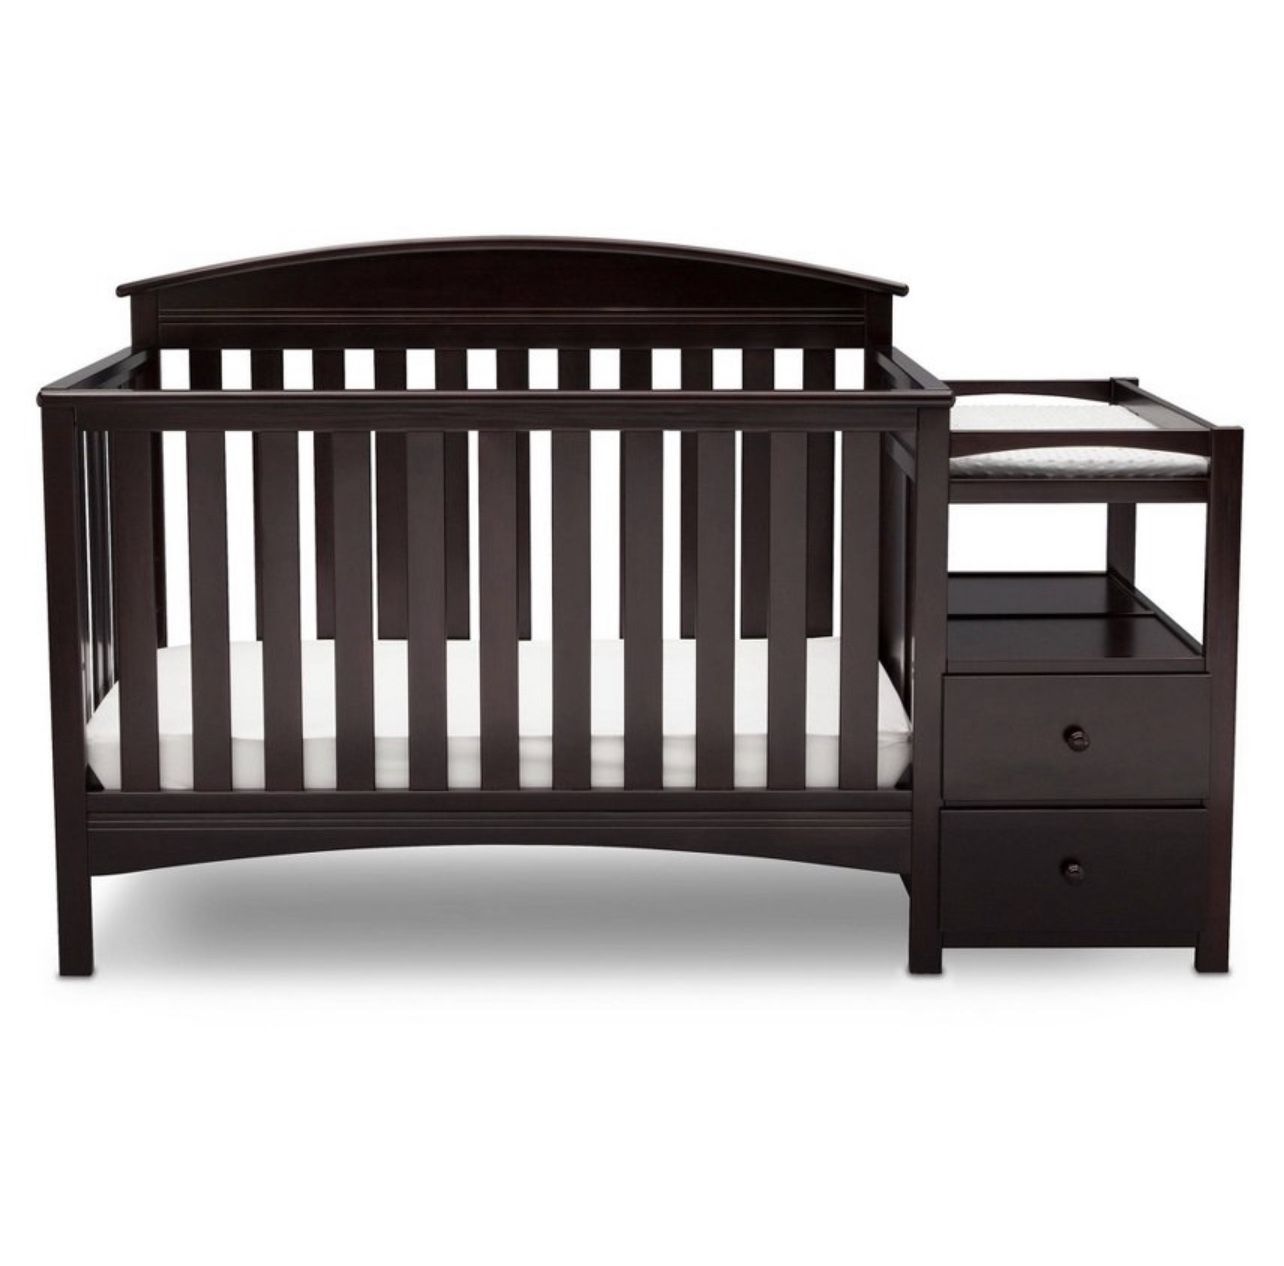 Delta Children’s Convertible Crib And Changing Table. Color Is Dark Chocolate